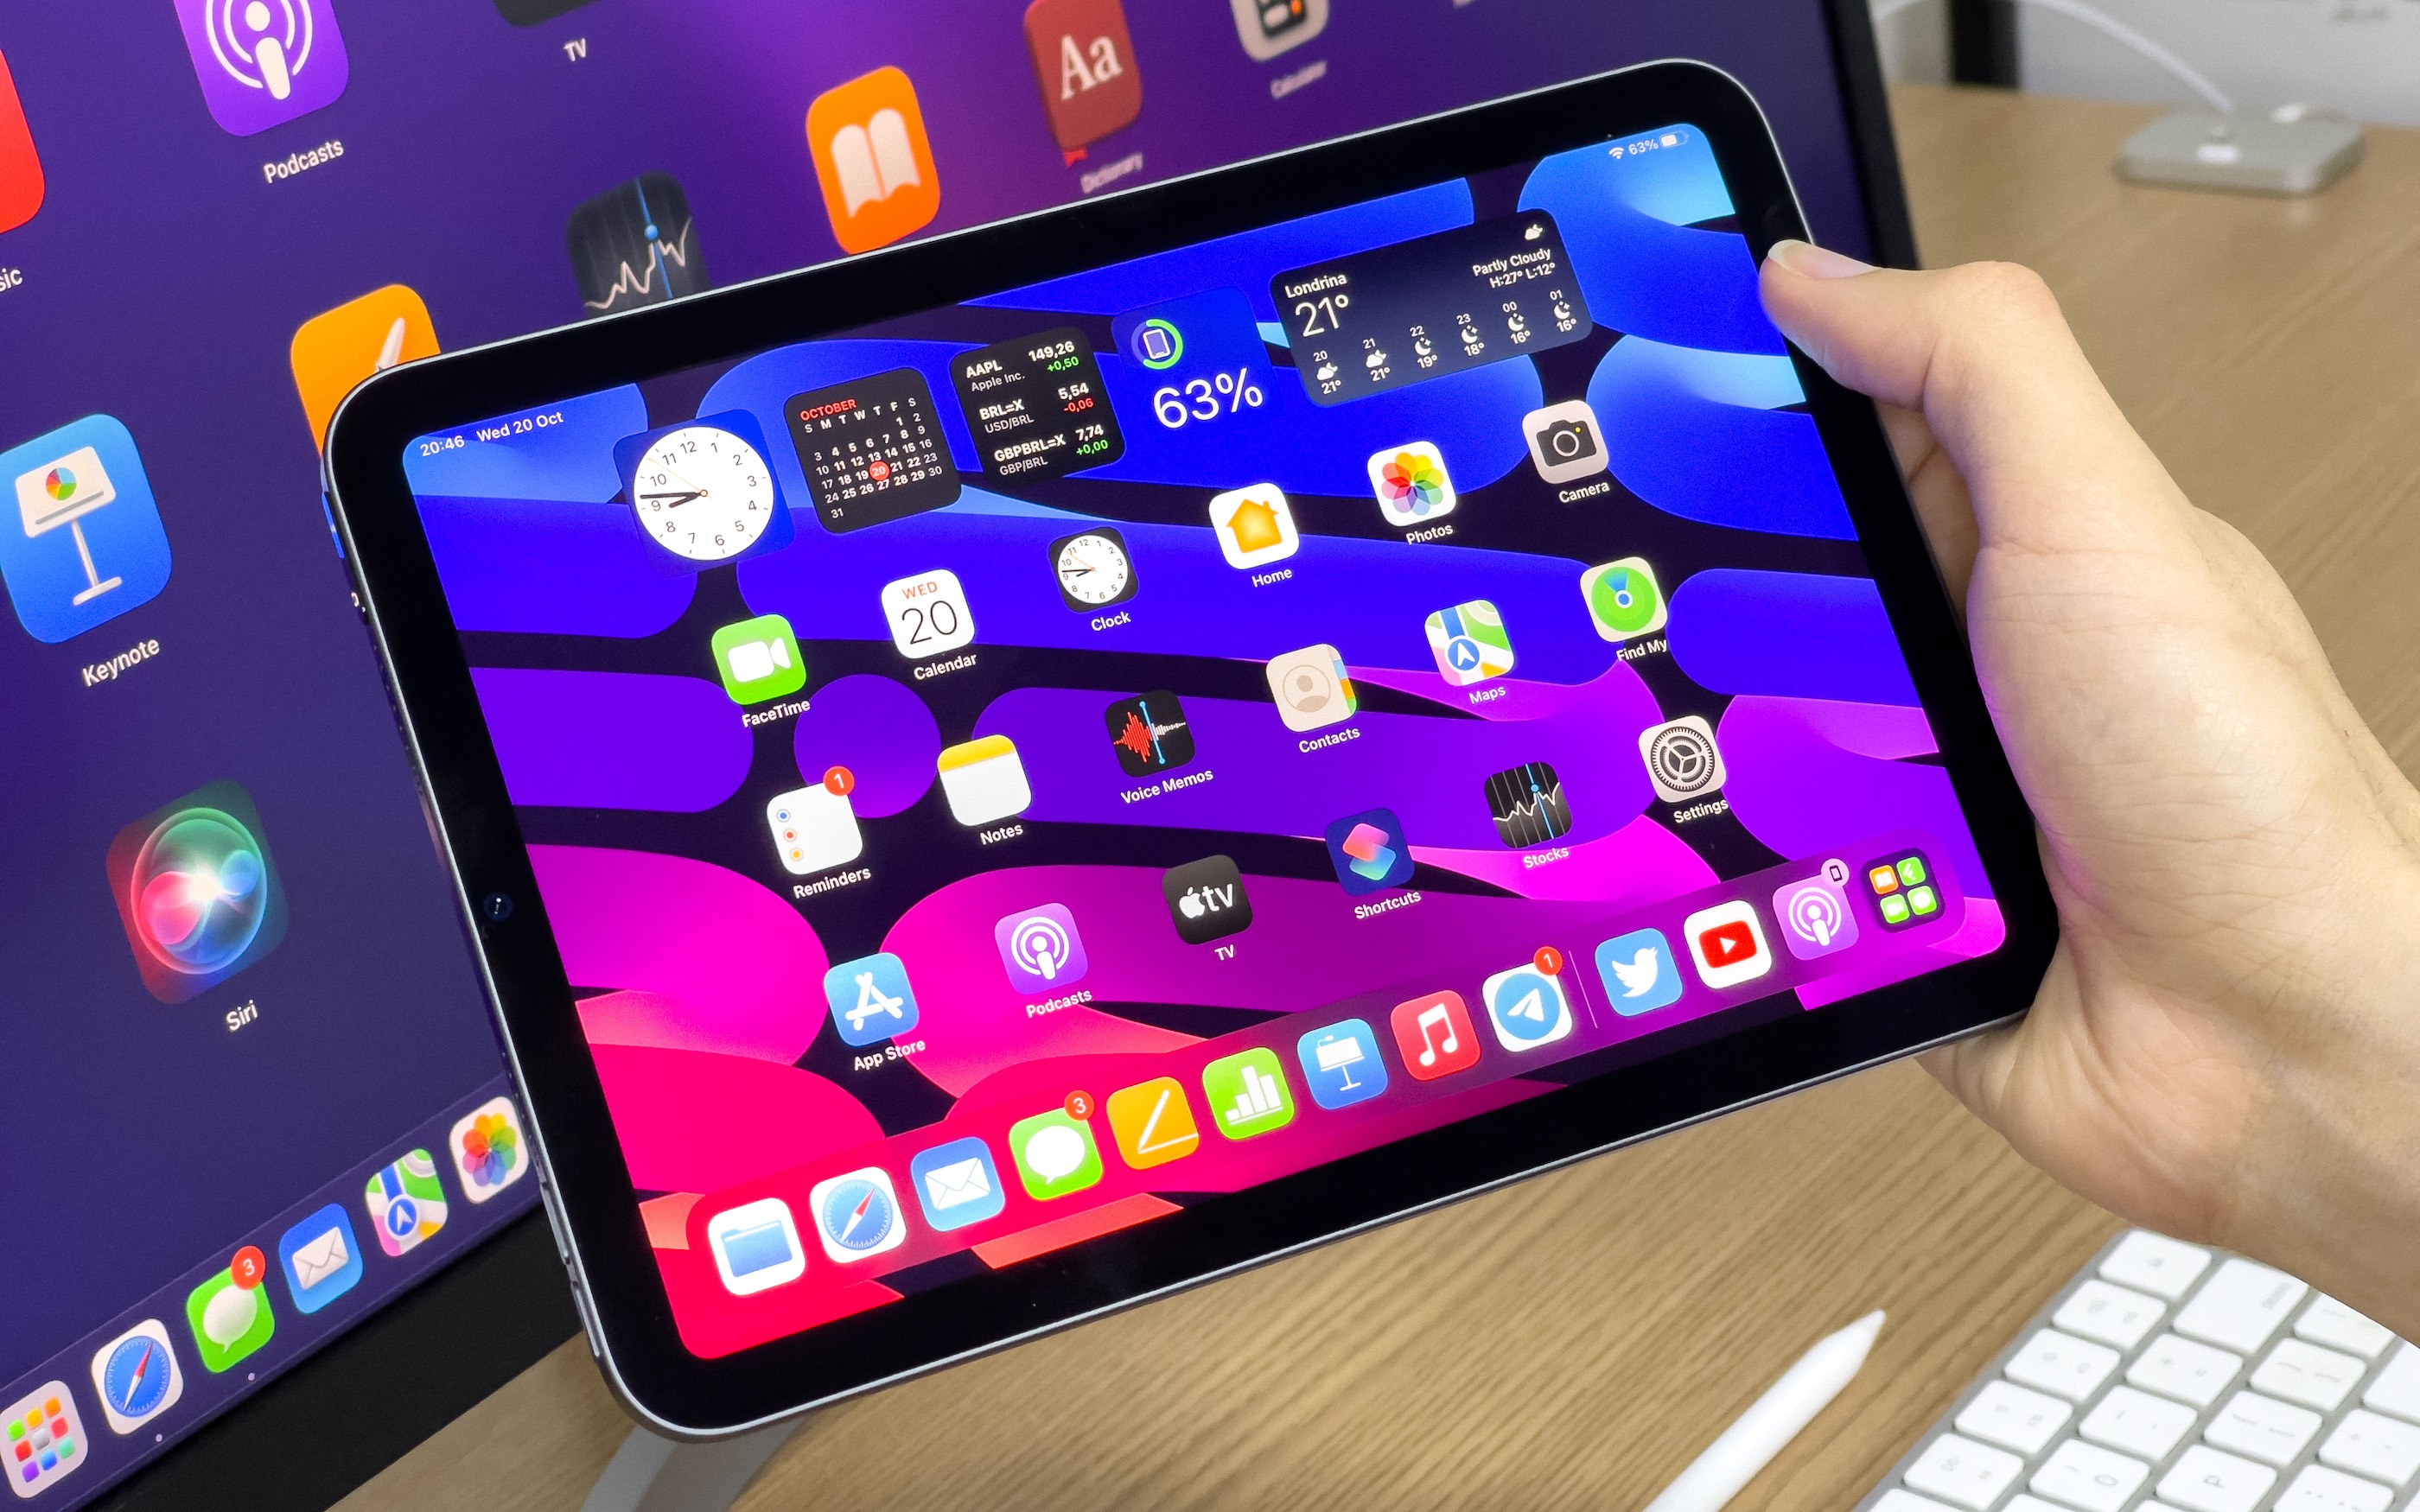 Opinion: Here's what it's like using the iPad mini 5 in 2021 - 9to5Mac